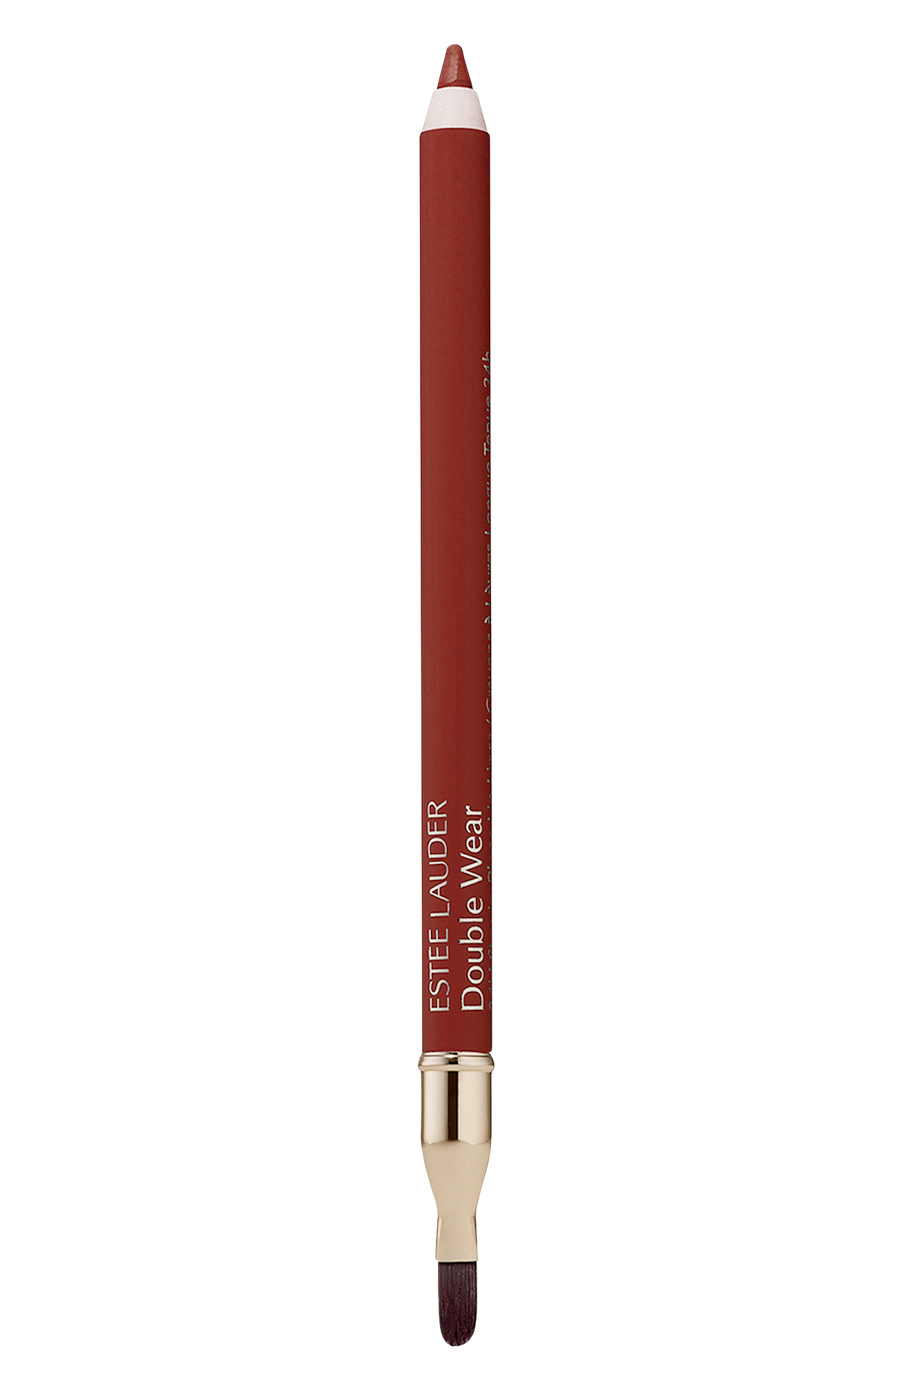 48 Sr2023 04 127 Estee Lauder Double Wear 24h Stay In Place Lip Liner, Nordstrom Old Orchard, 847 677 2121